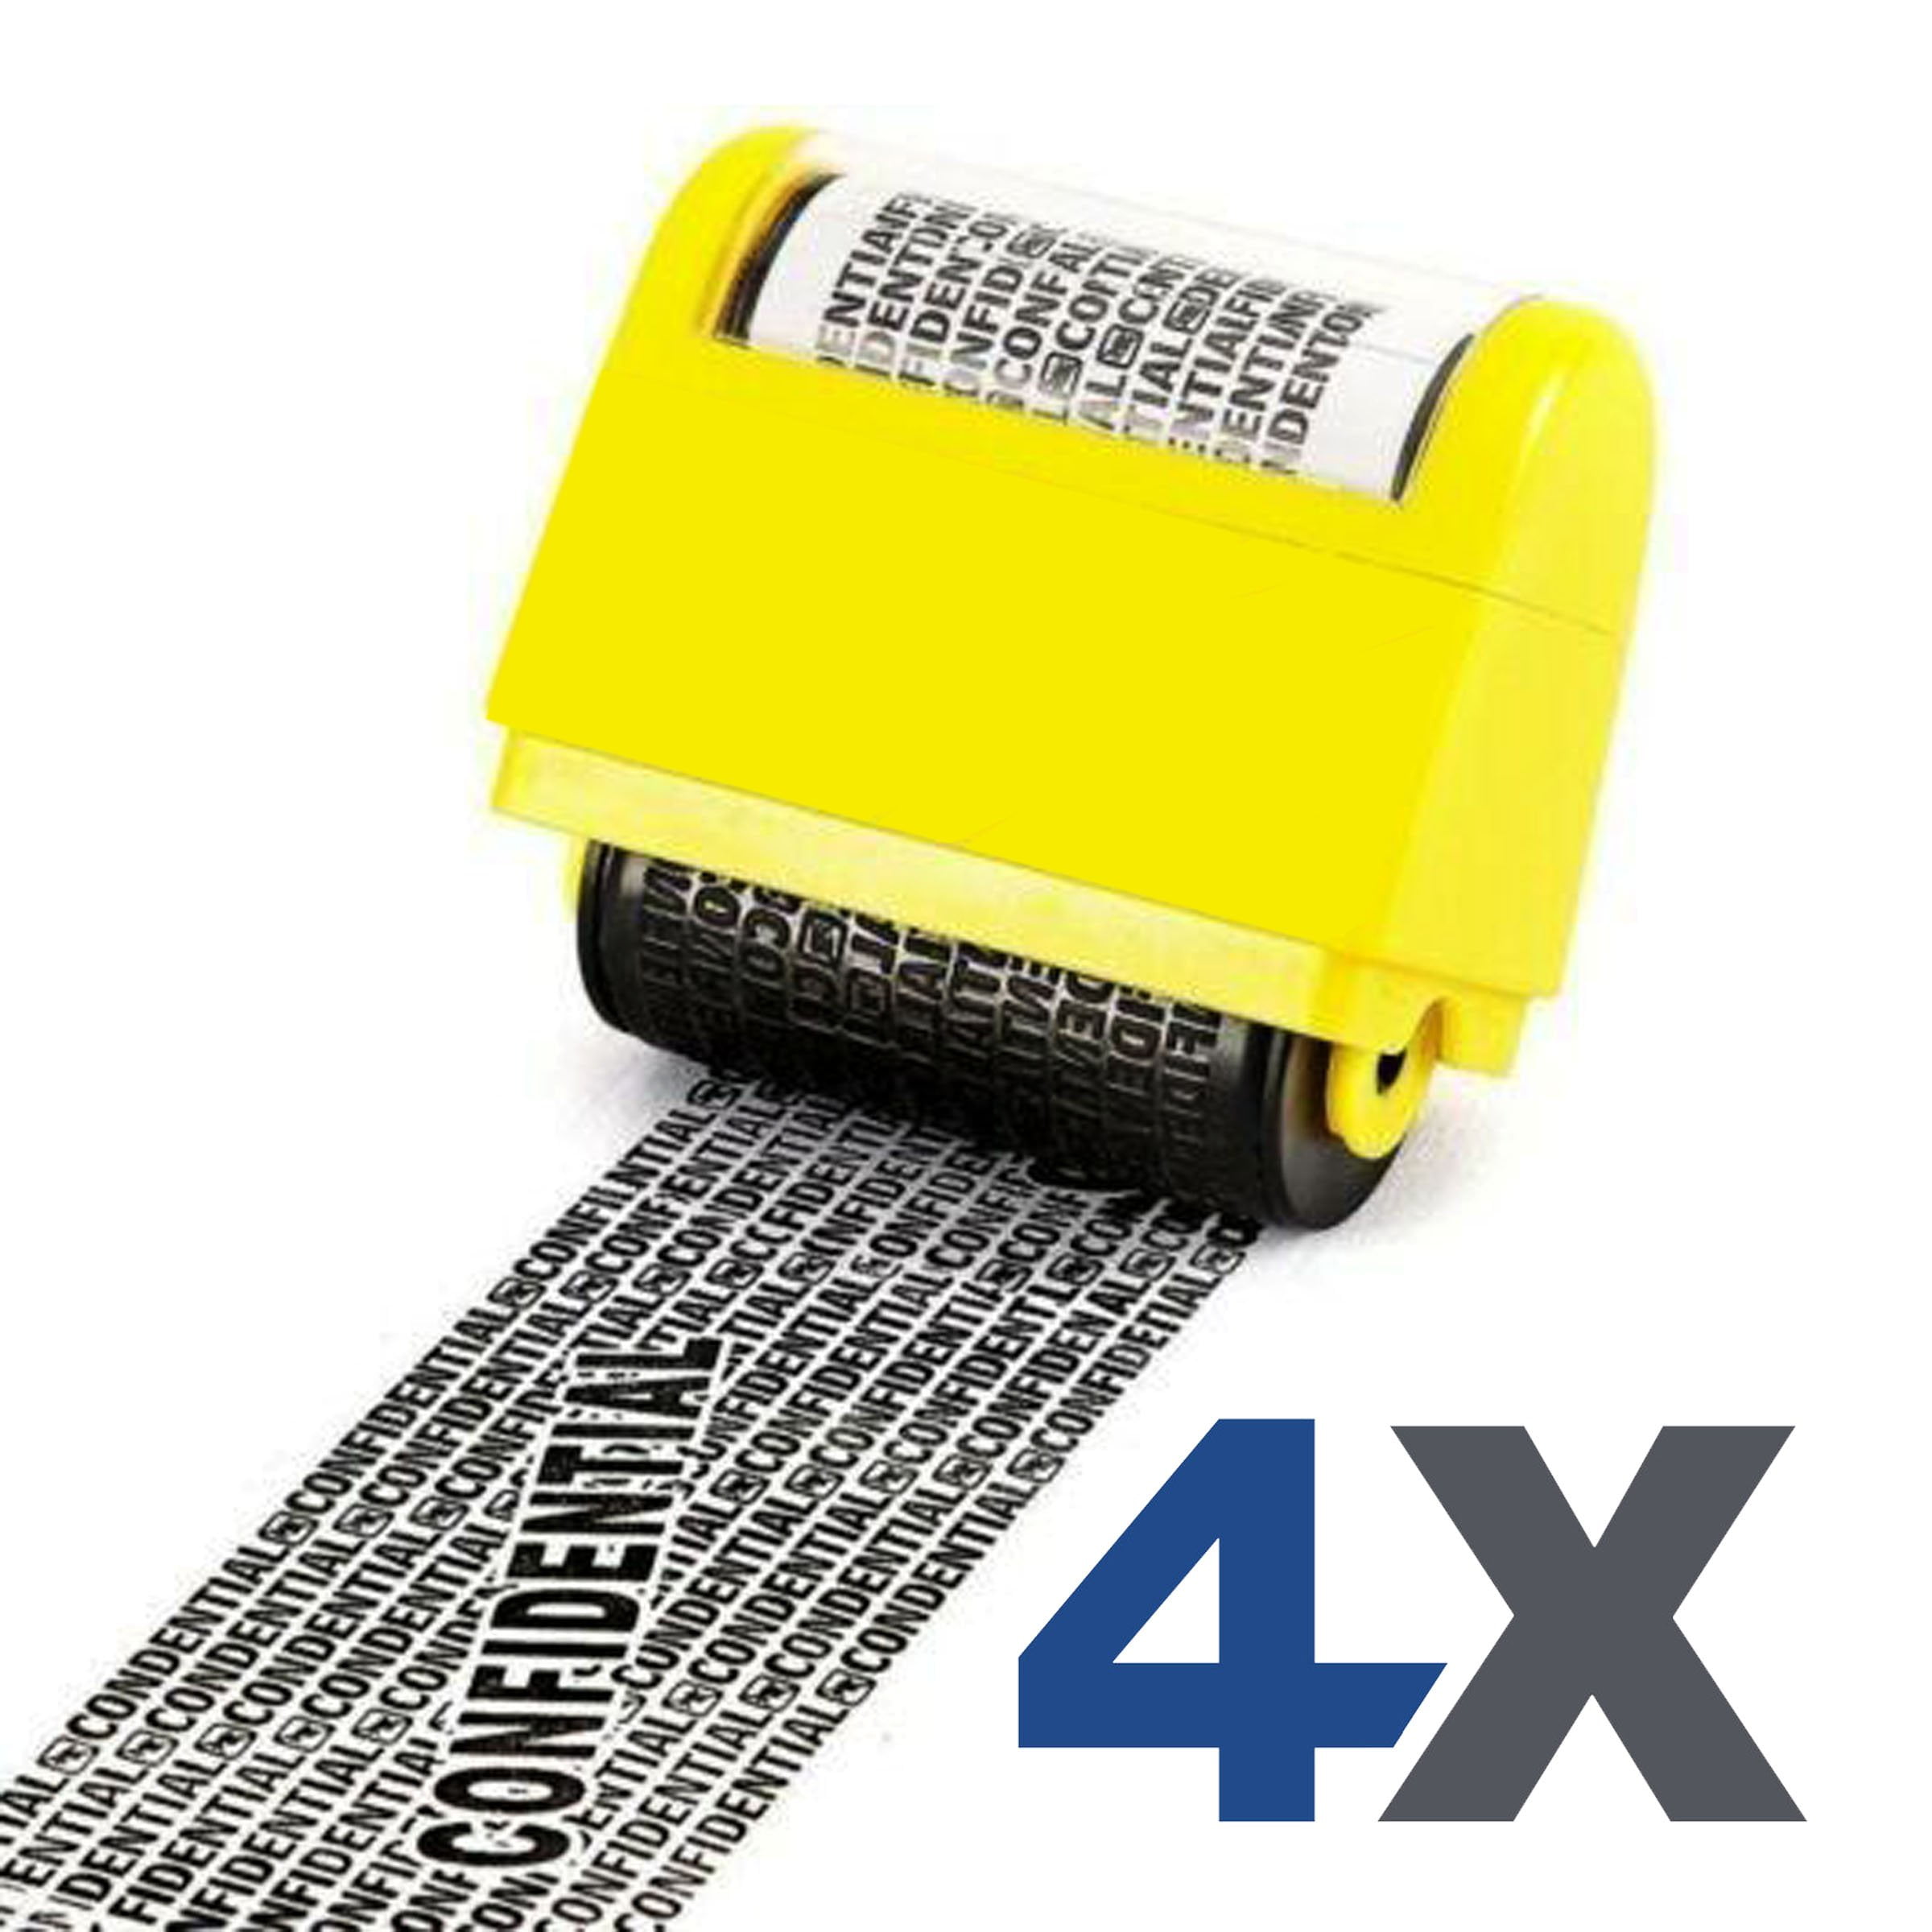 Identity Theft Prevention Security Roller Stamp 1.5 Inch Wide ID Blackout Yellow 